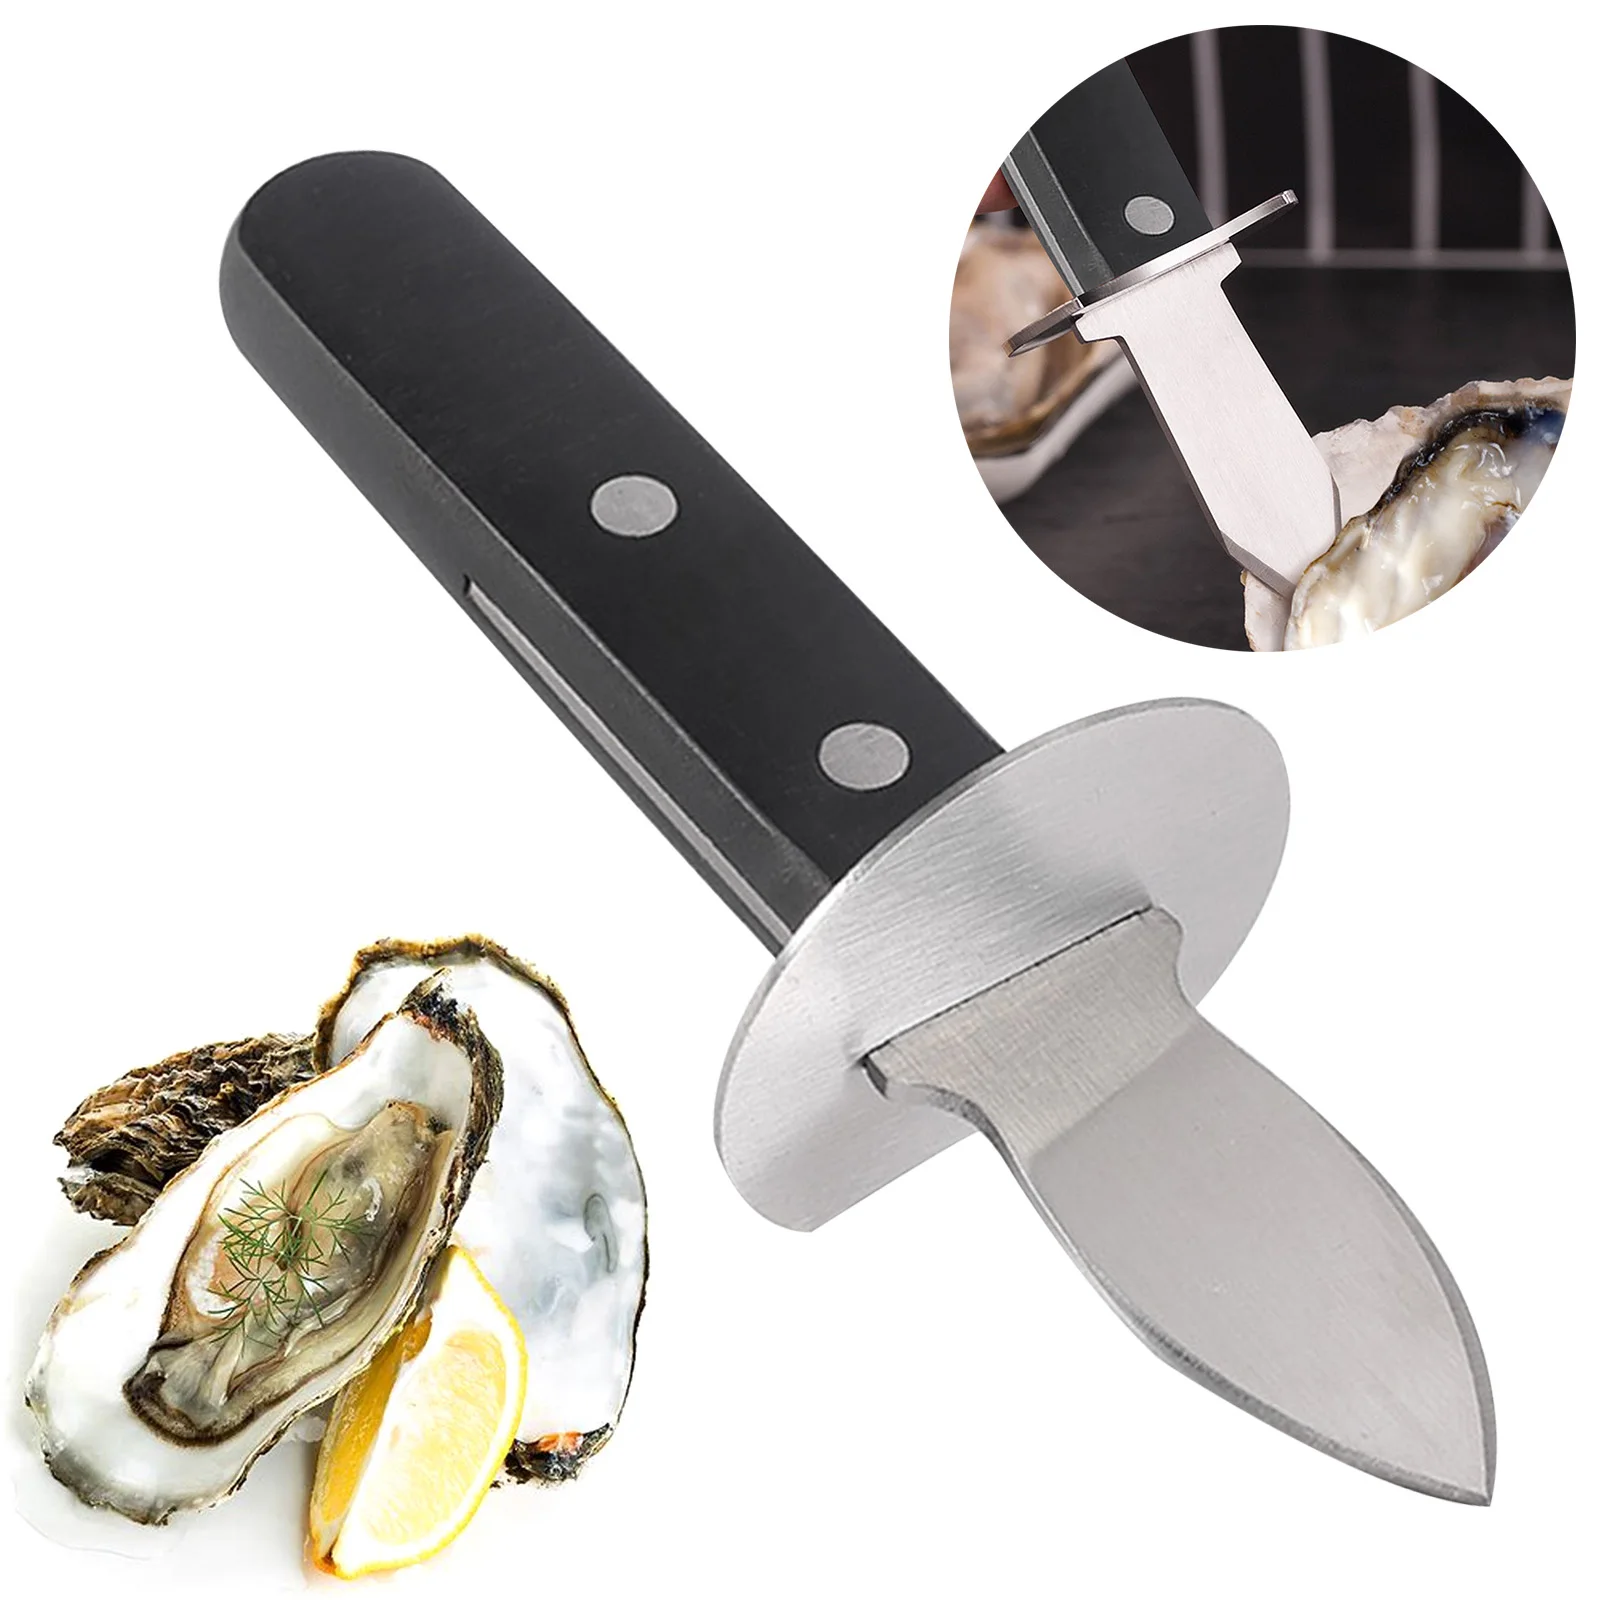 

Portable Stainless Steel Seafood scallop pry knife with wooden handle Oyster knives Sharp-edged Shucker Shell Seafood Opener